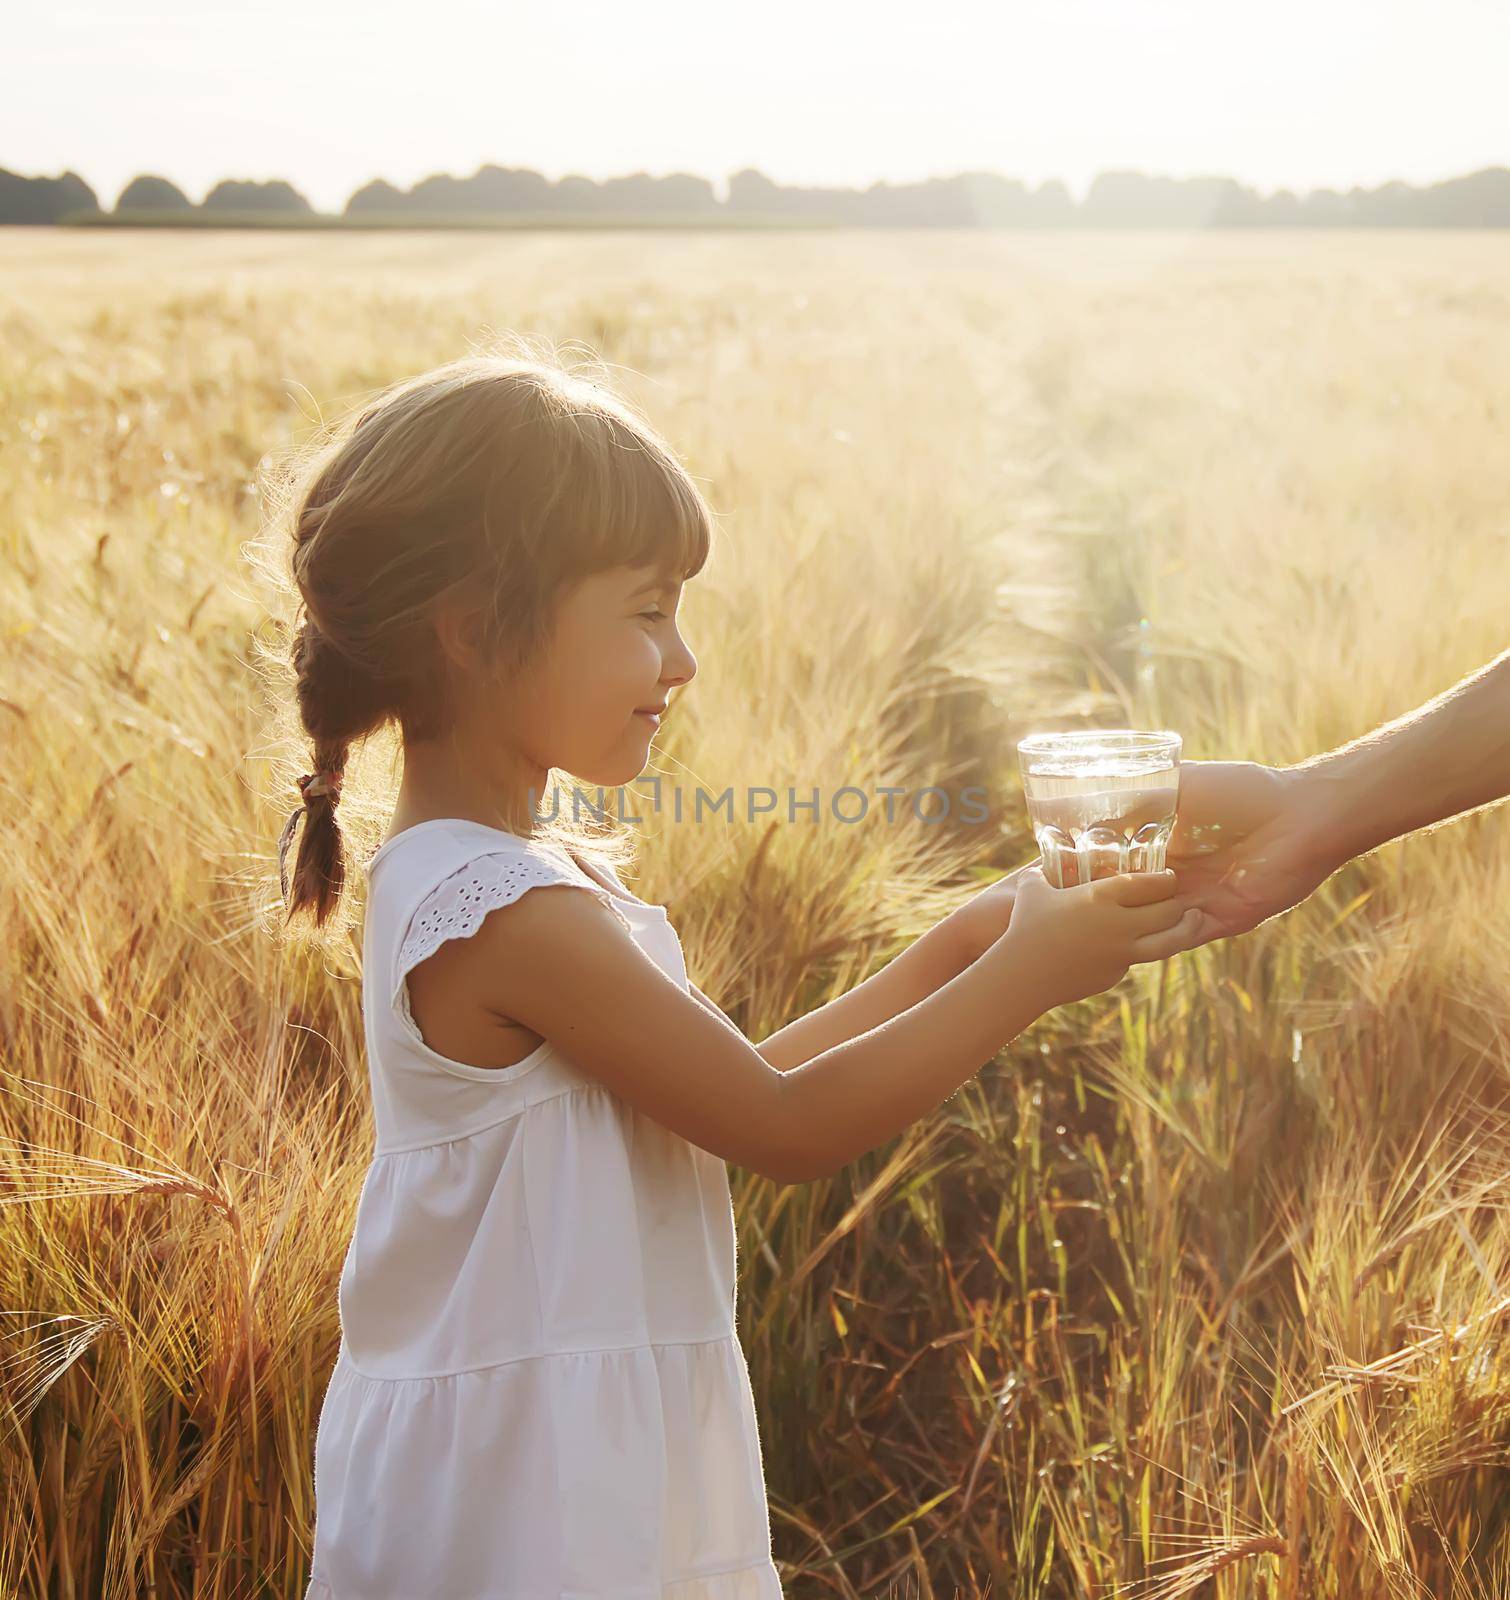 The father gives the child a glass of water. Selective focus. by yanadjana